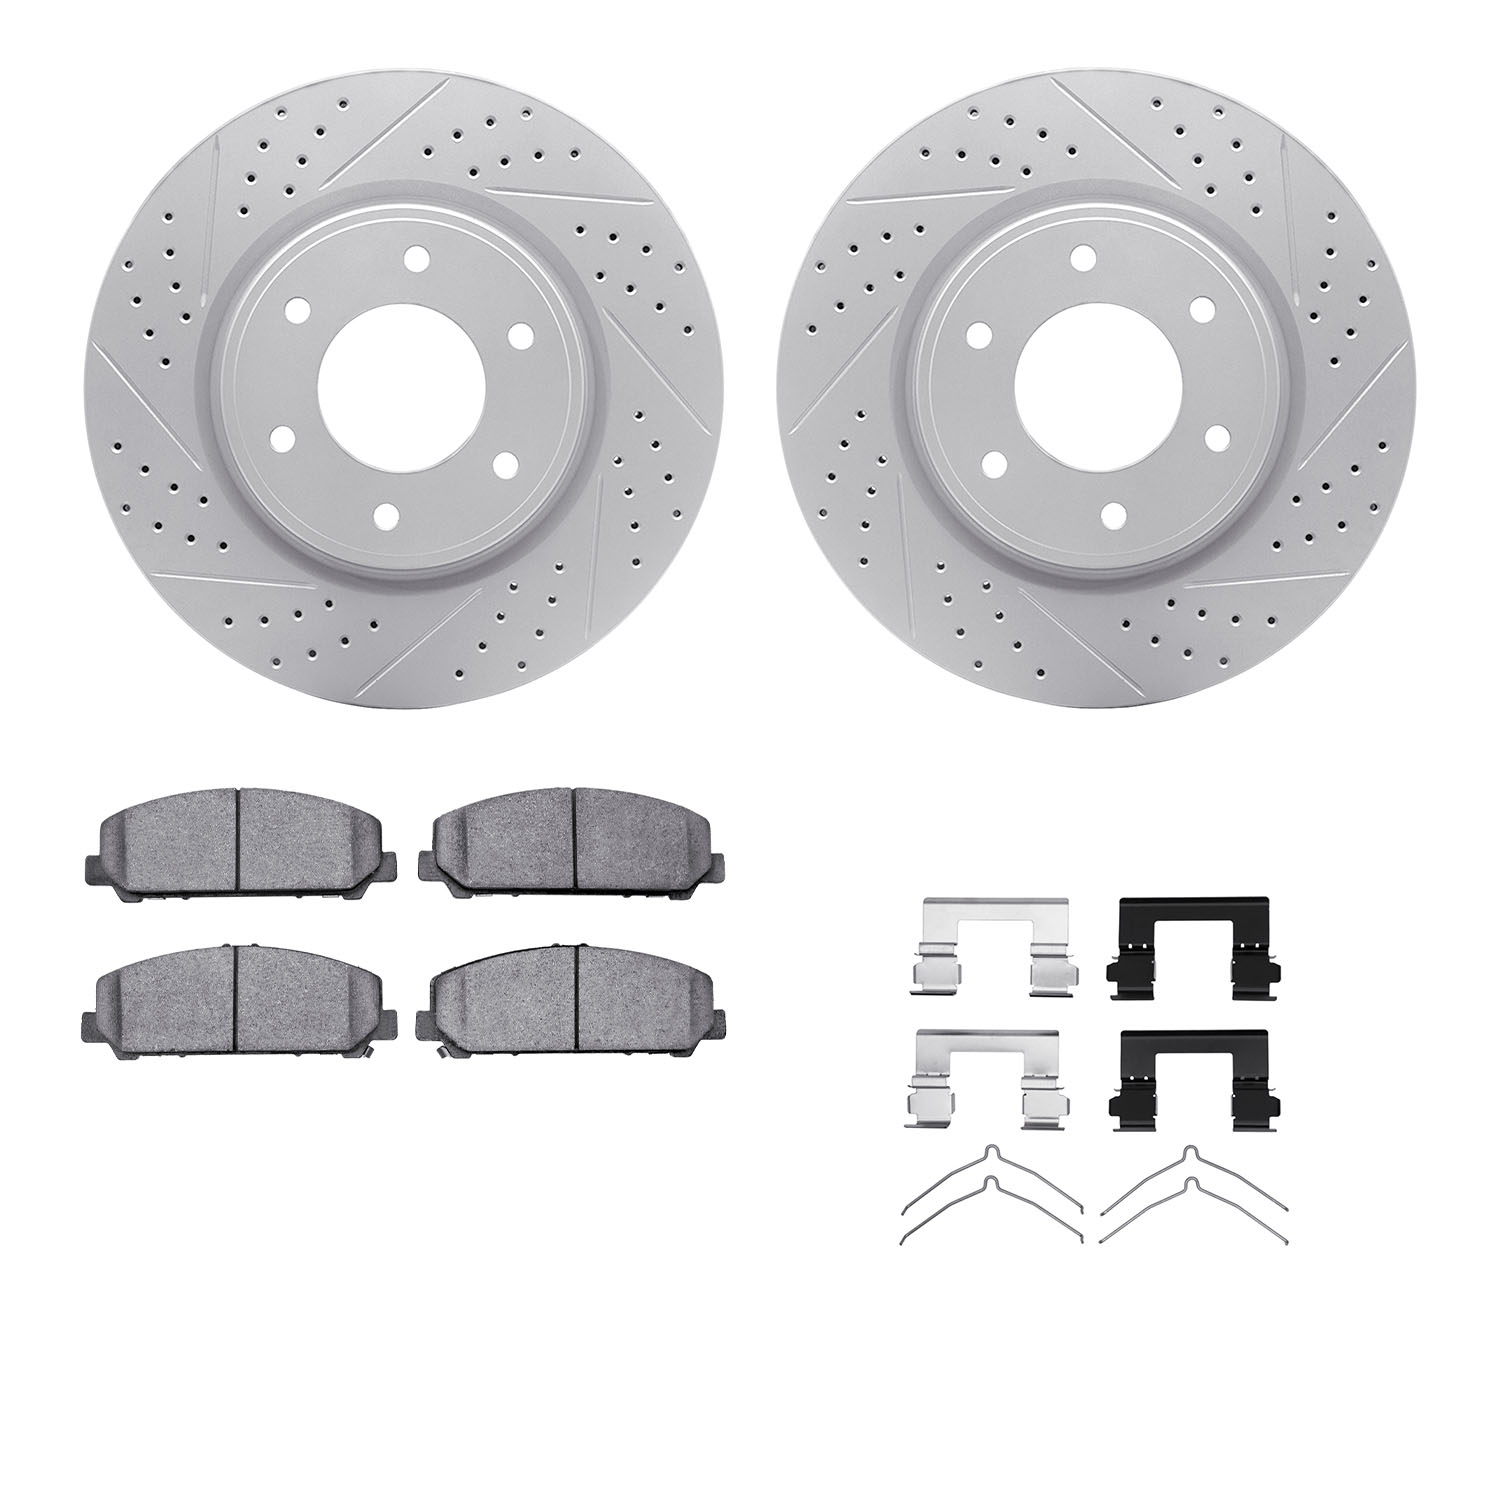 2212-67002 Geoperformance Drilled/Slotted Rotors w/Heavy-Duty Pads Kit & Hardware, Fits Select Infiniti/Nissan, Position: Front